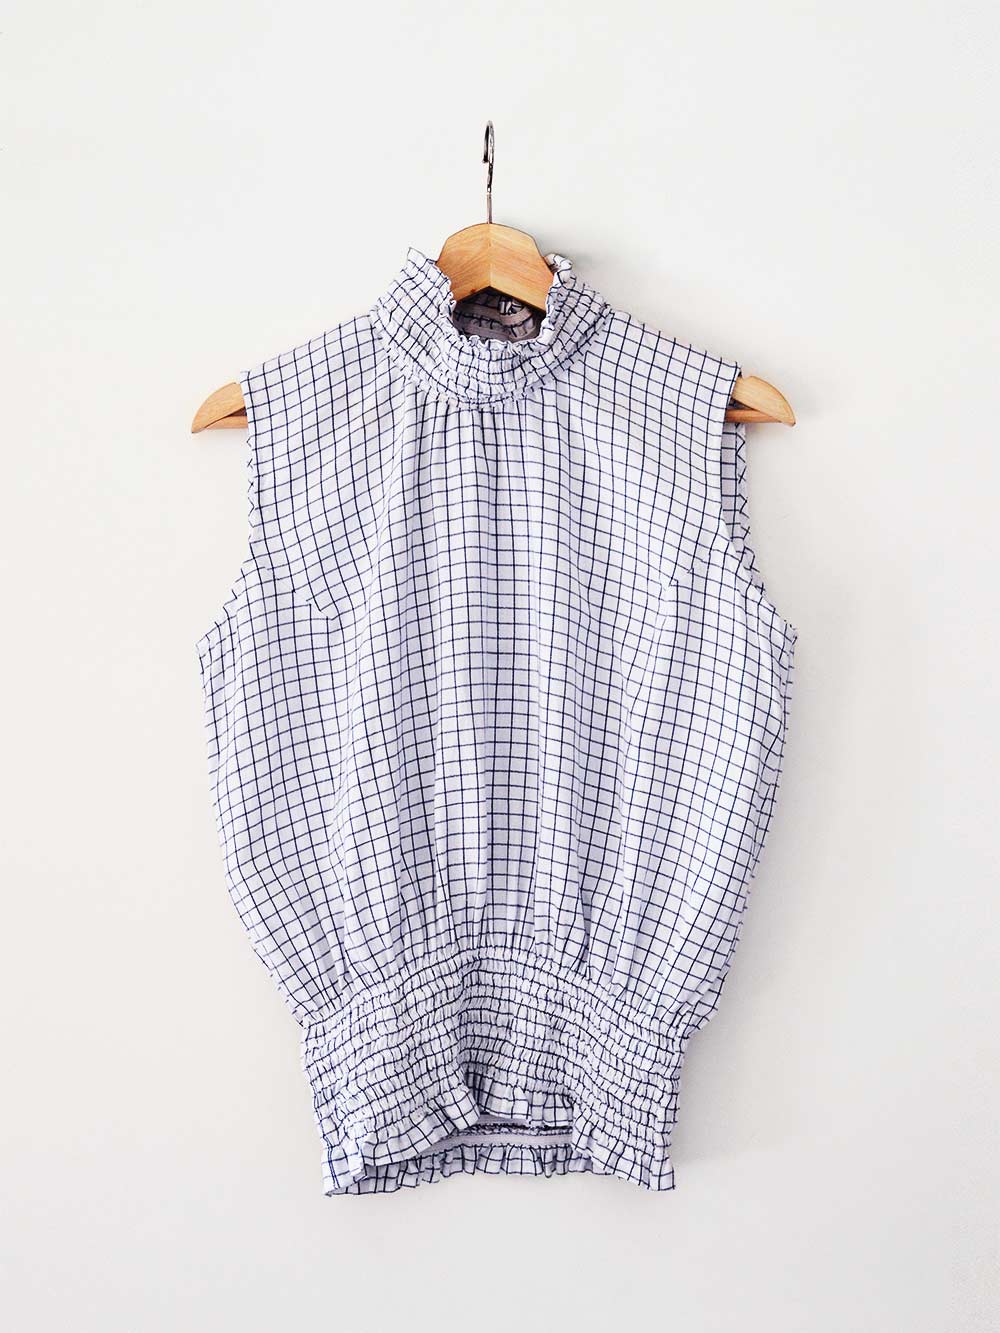 white an blue checked Sleeveless top with gathered collar and waist, designed by Khumanthem Atelier